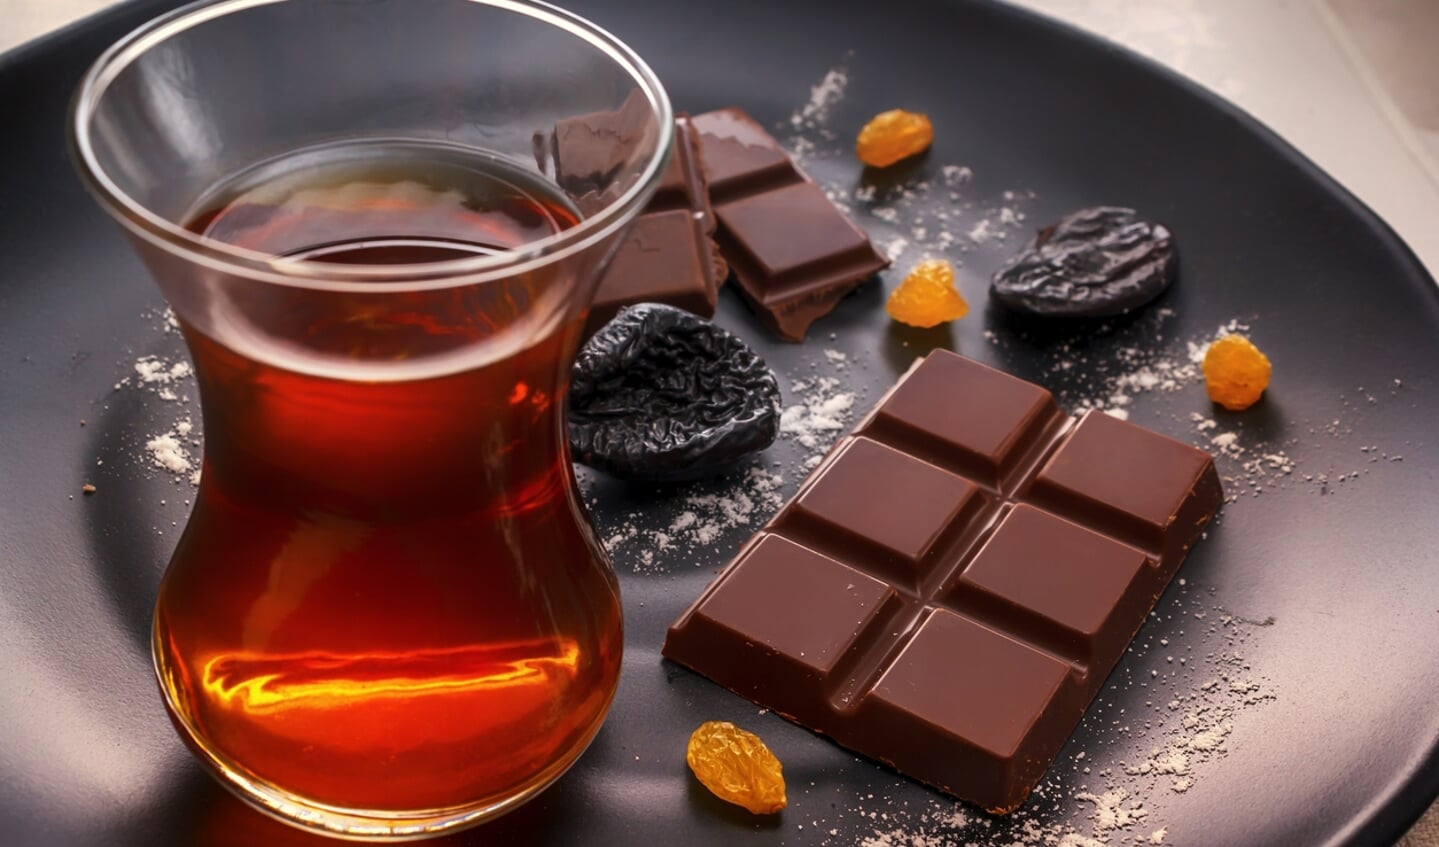 Chocolate, prunes, raisins and tea in a glass on a black plate. Soft light